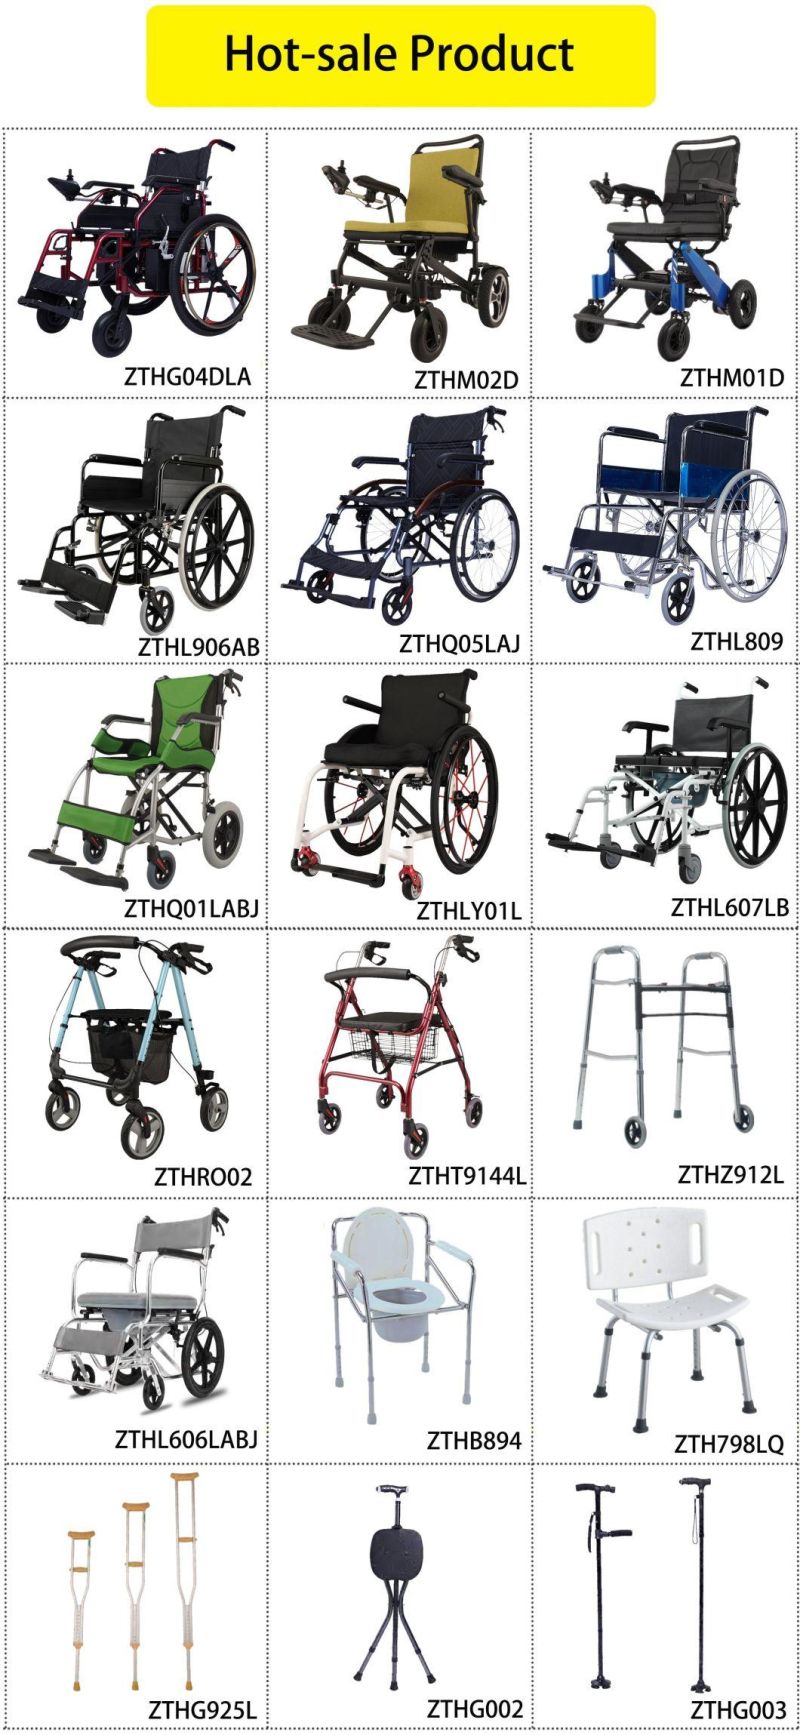 with PVC Soft Seat Board Elderly People Safety Outdoor Aluminum Walker Frame 2 Wheels Easy Carry Lightweight Height Adjust Walking Aid